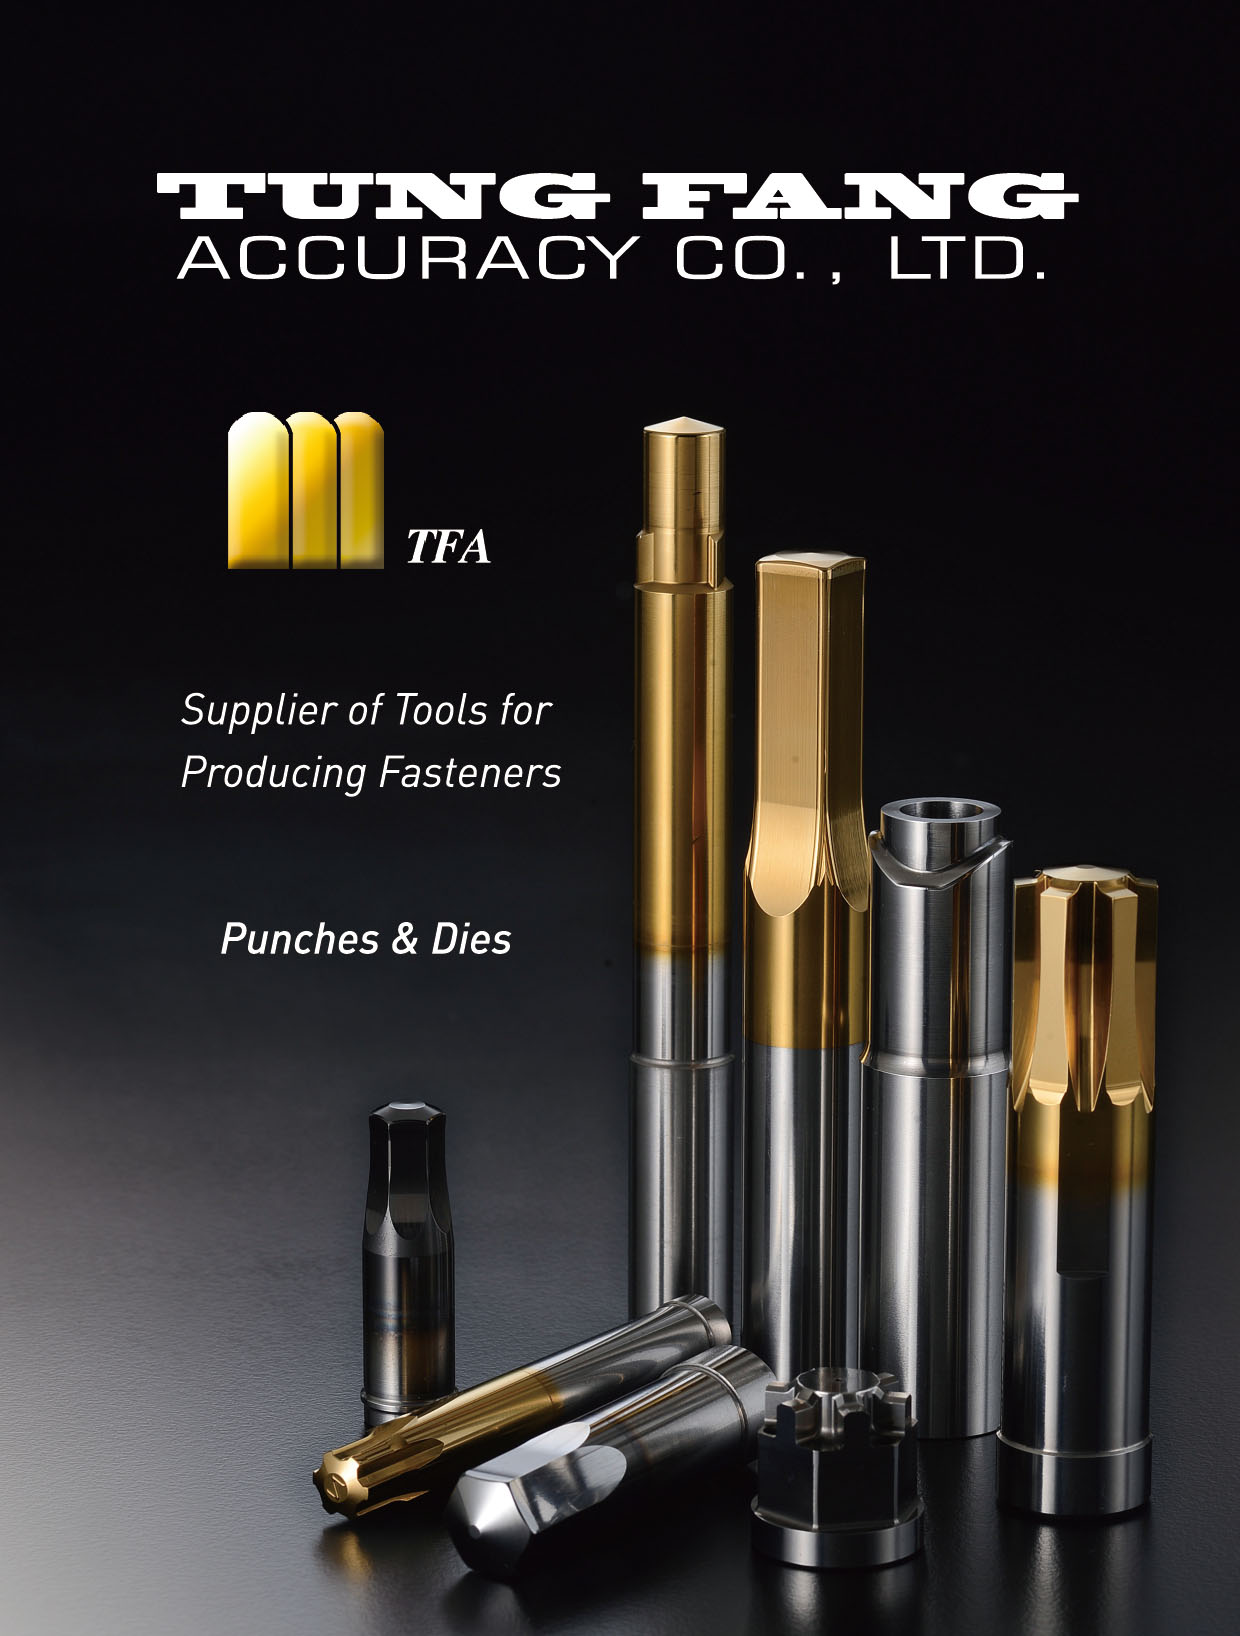 TUNG FANG ACCURACY CO., LTD.  Online Catalogues